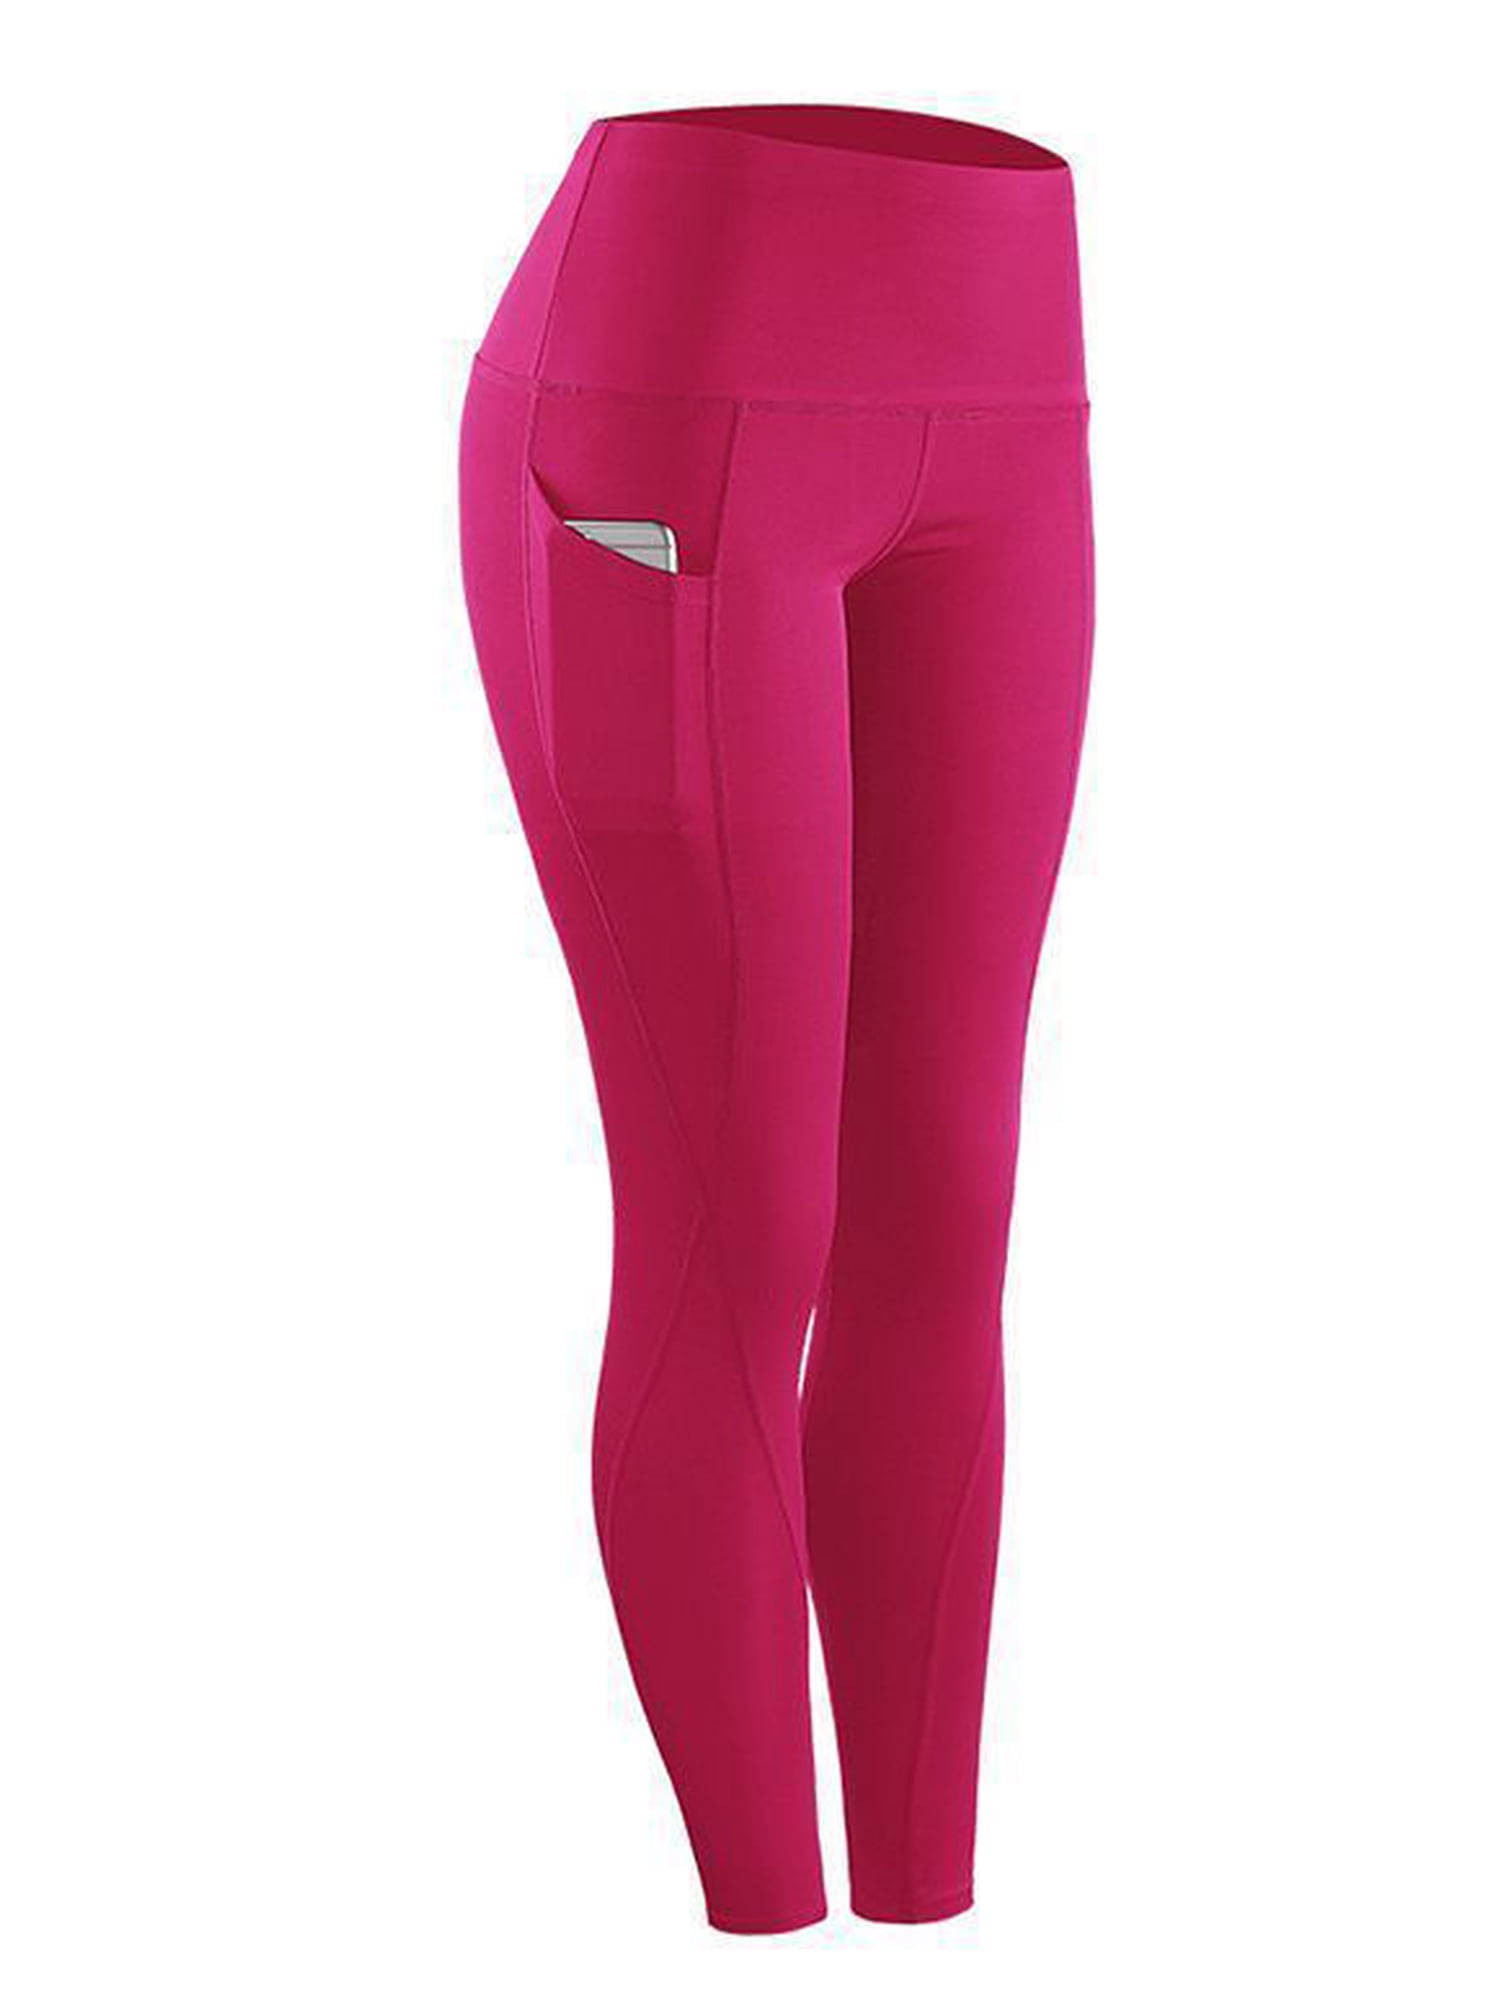 Niuer Women Stretch High Waist Leggings Ladies With Pockets Bottoms Tight  Running Solid Color Long Trousers Pink M 